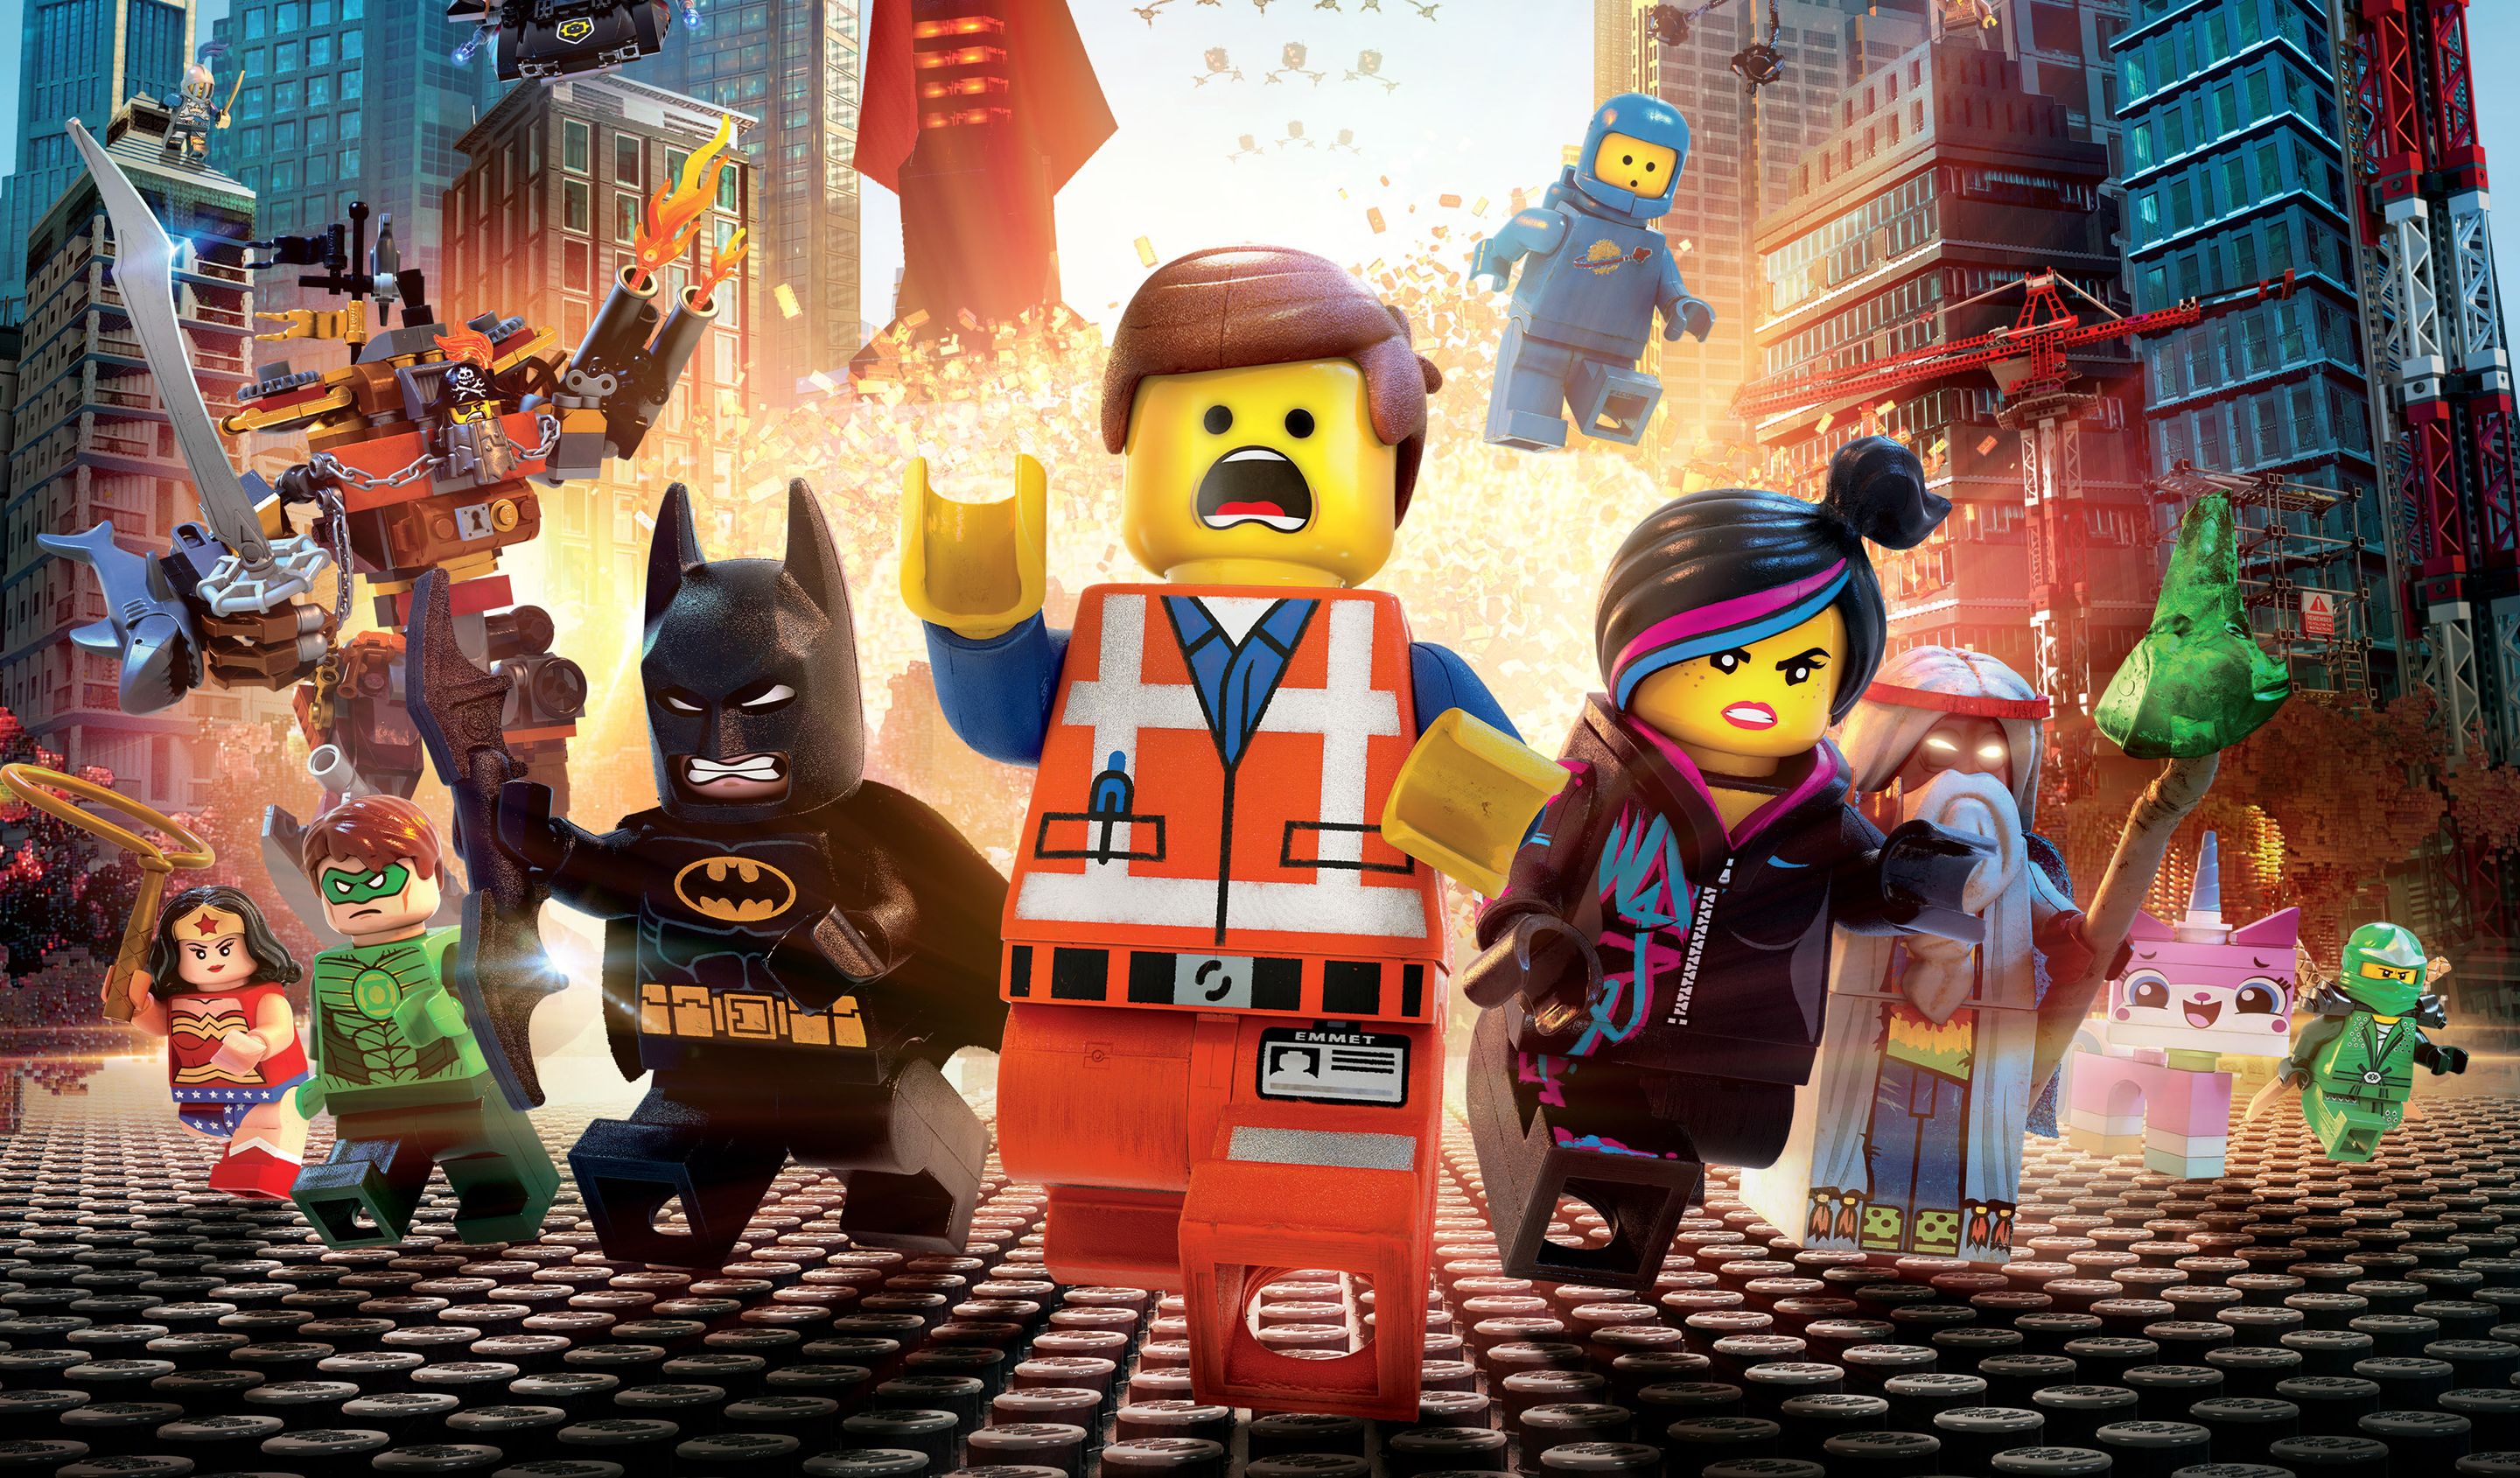 The LEGO Movie reigns supreme at the box office